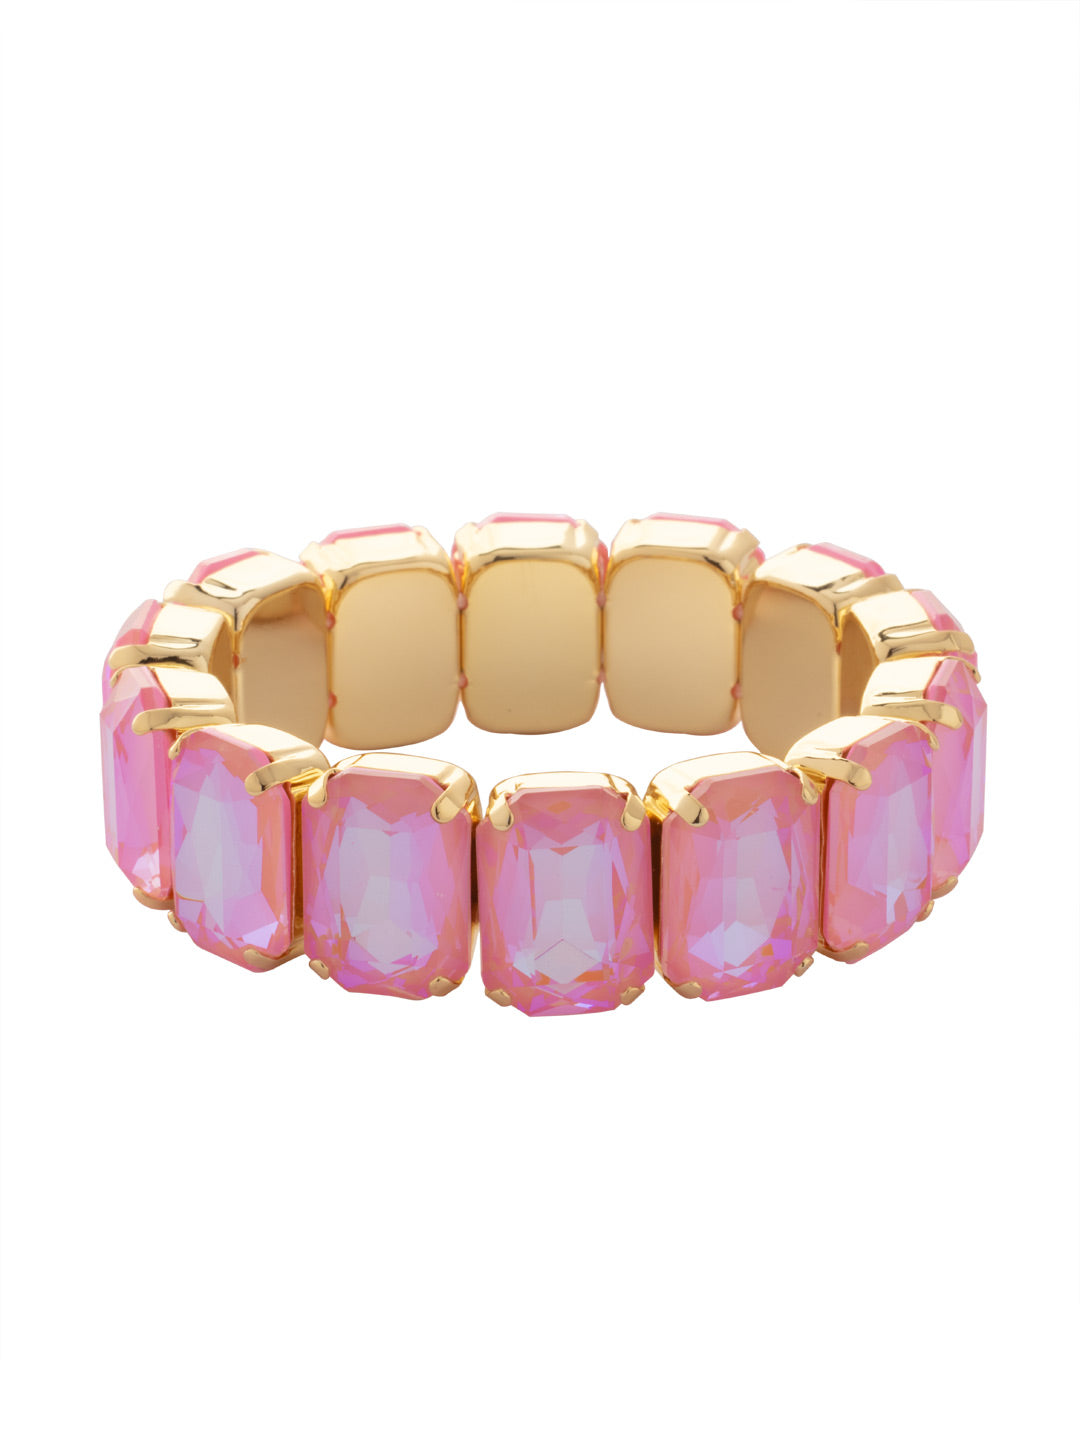 Emerald Cut Stretch Bracelet - 4BFF70BGBFL - <p>The Emerald Cut Stretch Bracelet features repeating emerald cut crystals on a multi-layered stretchy jewelry filament, creating a durable and trendy statement piece. From Sorrelli's Big Flirt collection in our Bright Gold-tone finish.</p>